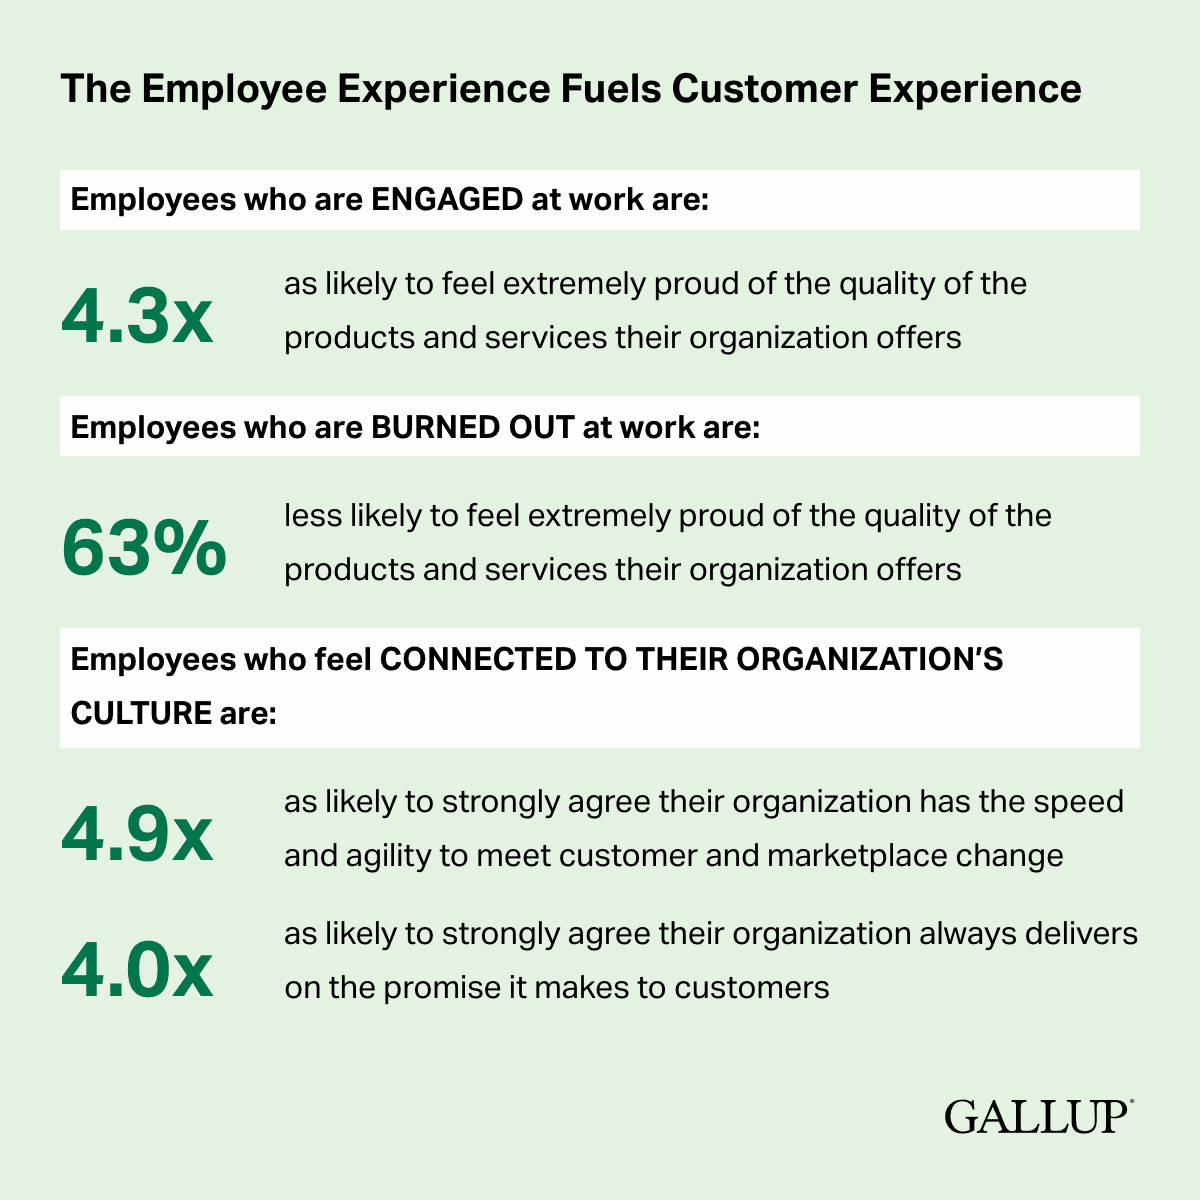 Infographic: Employee experience and engagement relating to burnout and organizational connection.